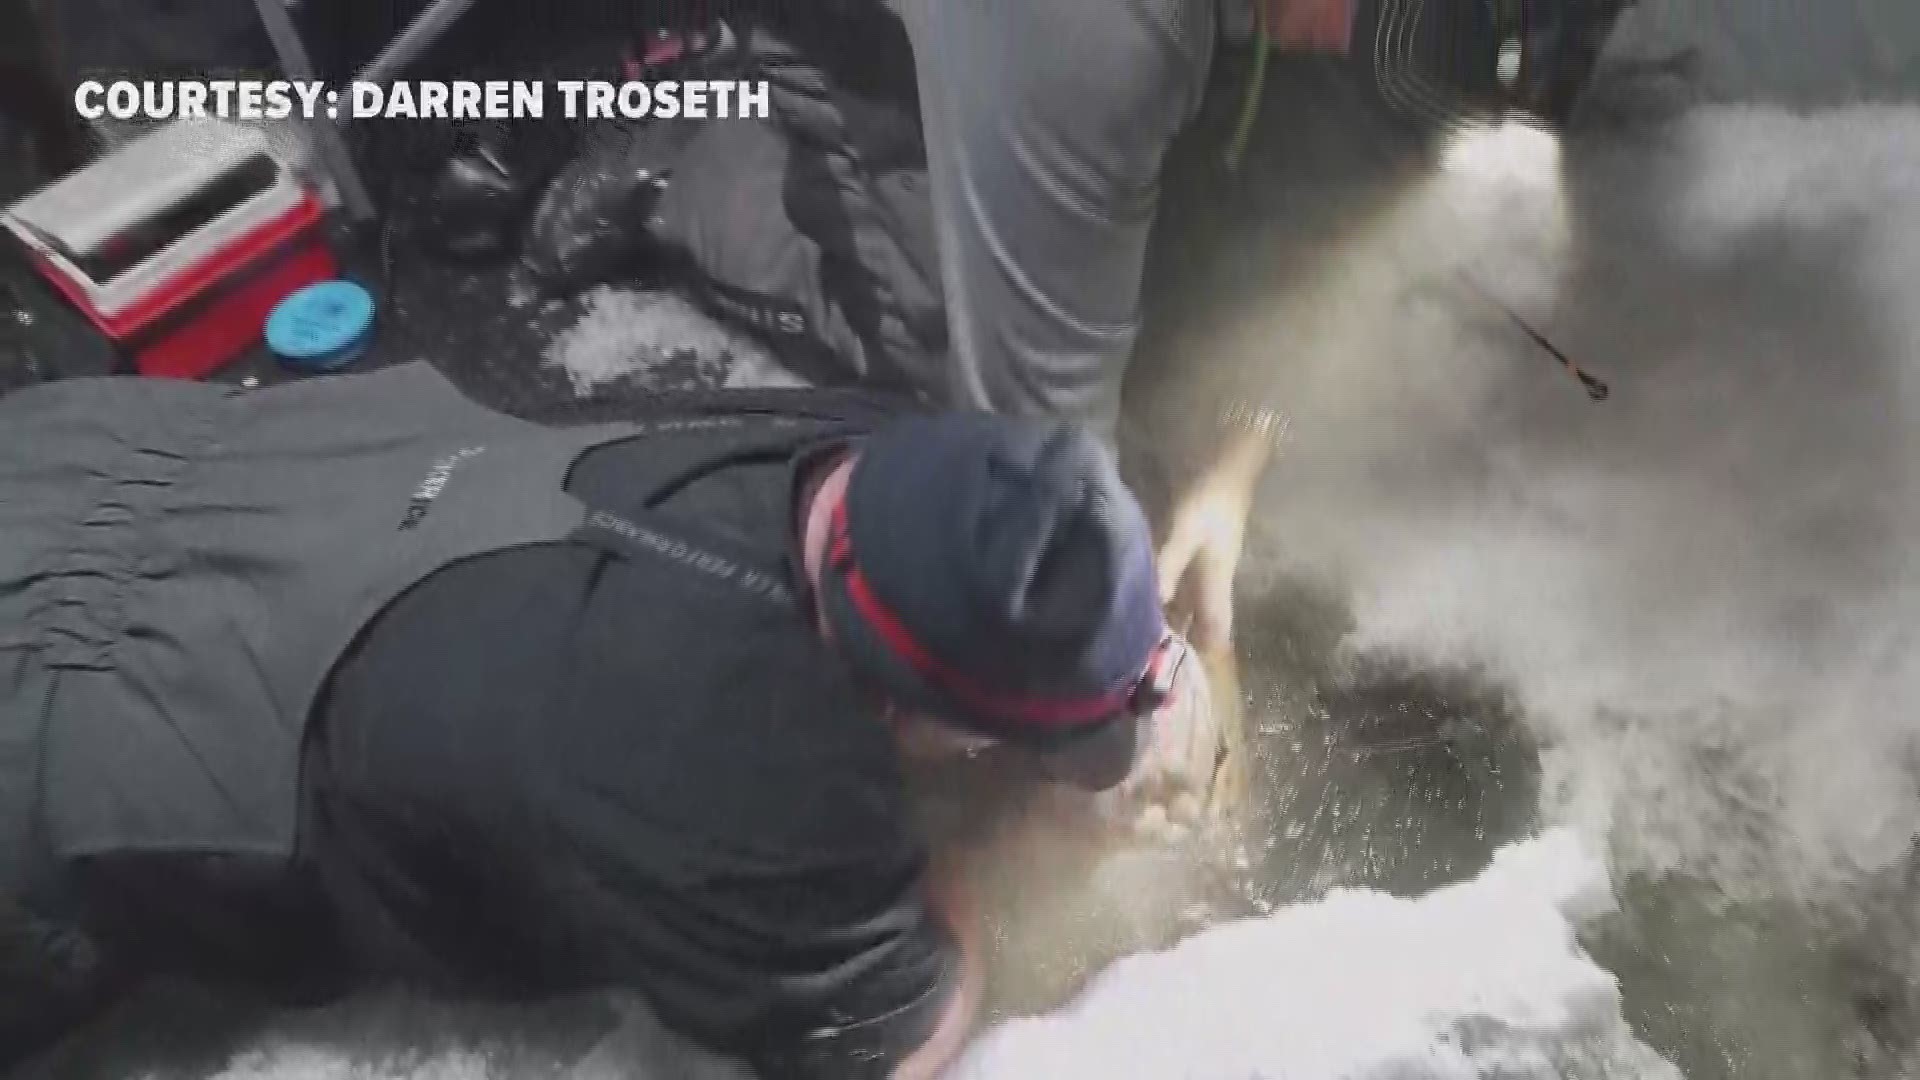 A 120-pound, 78-inch sturgeon caught by an ice fisherman over the weekend may be the biggest fish ever caught in Minnesota. Video courtesy: Darren Troseth. https://kare11.tv/2N6odCM